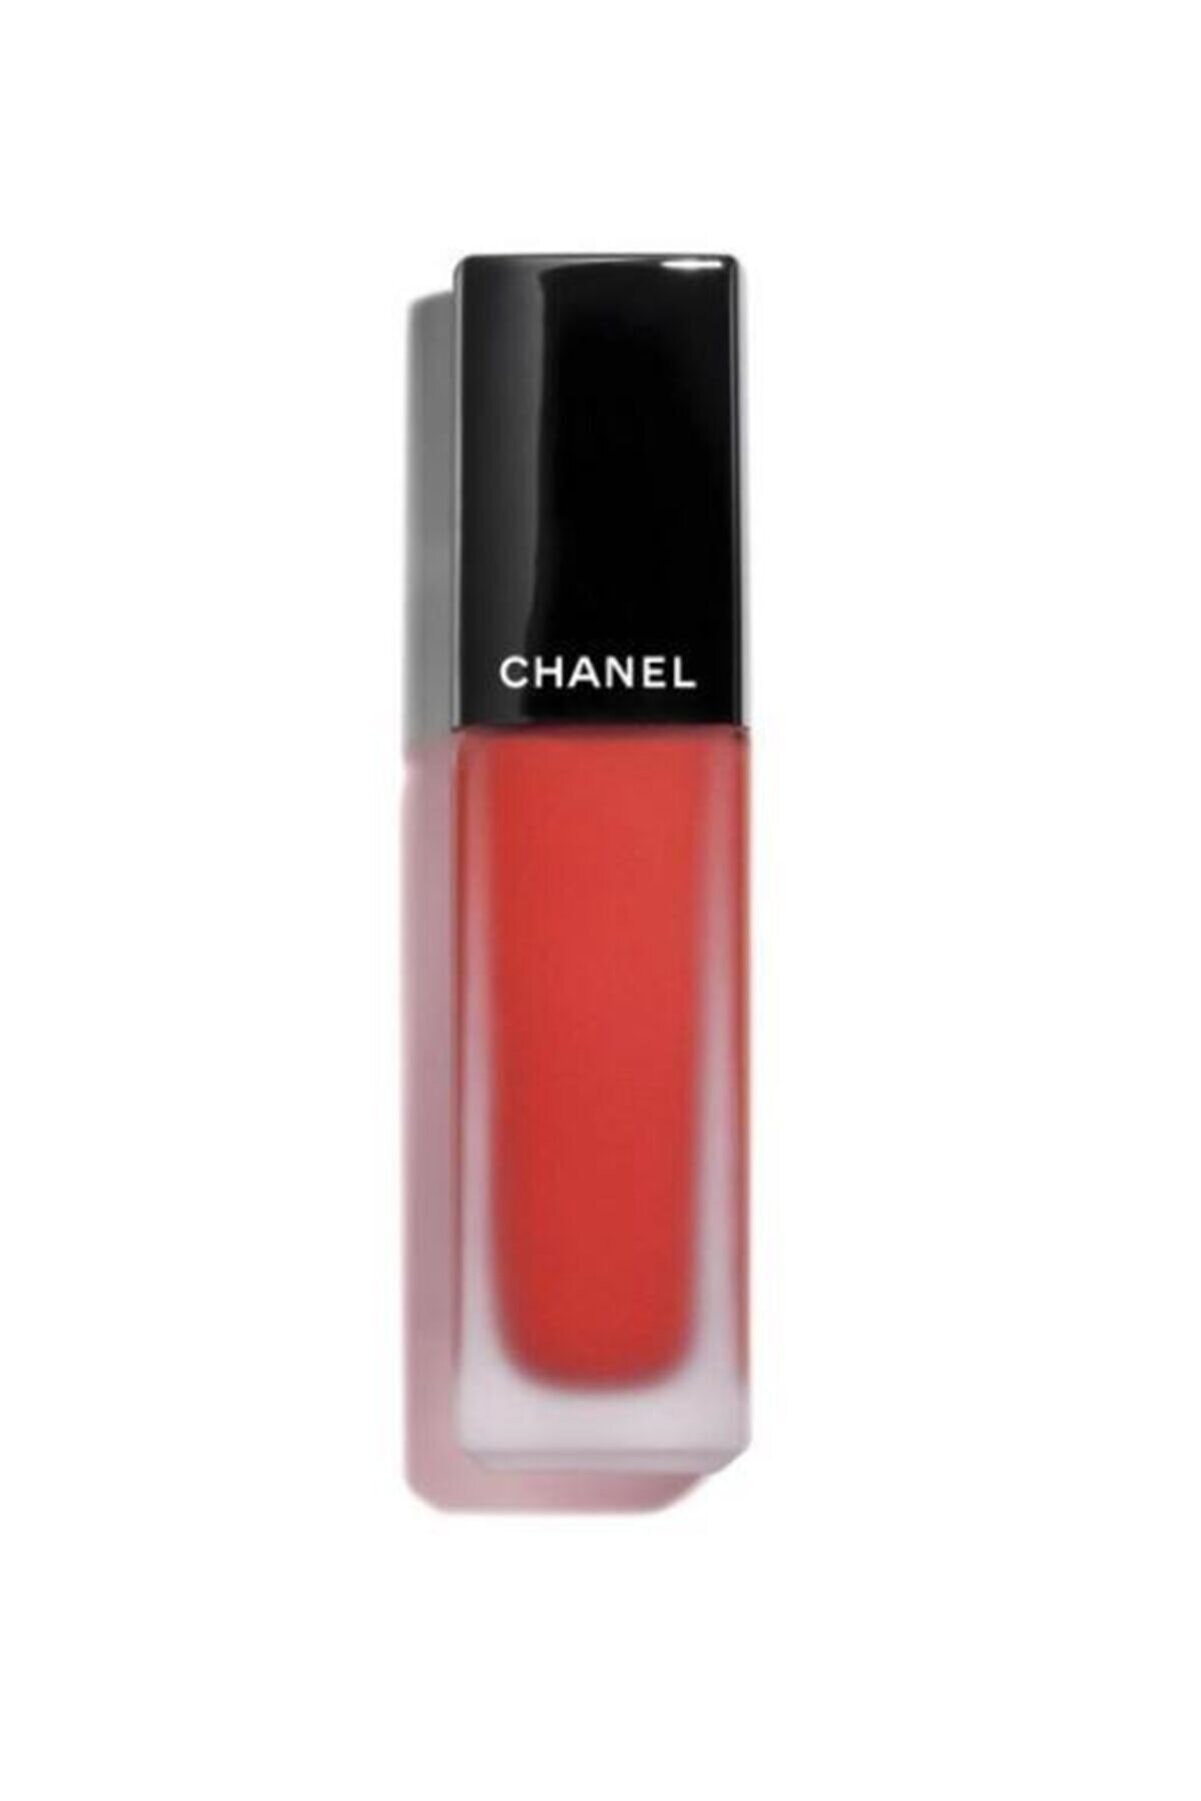 Chanel Rouge Allure Ink Likit Ruj - 164 Entusiasta